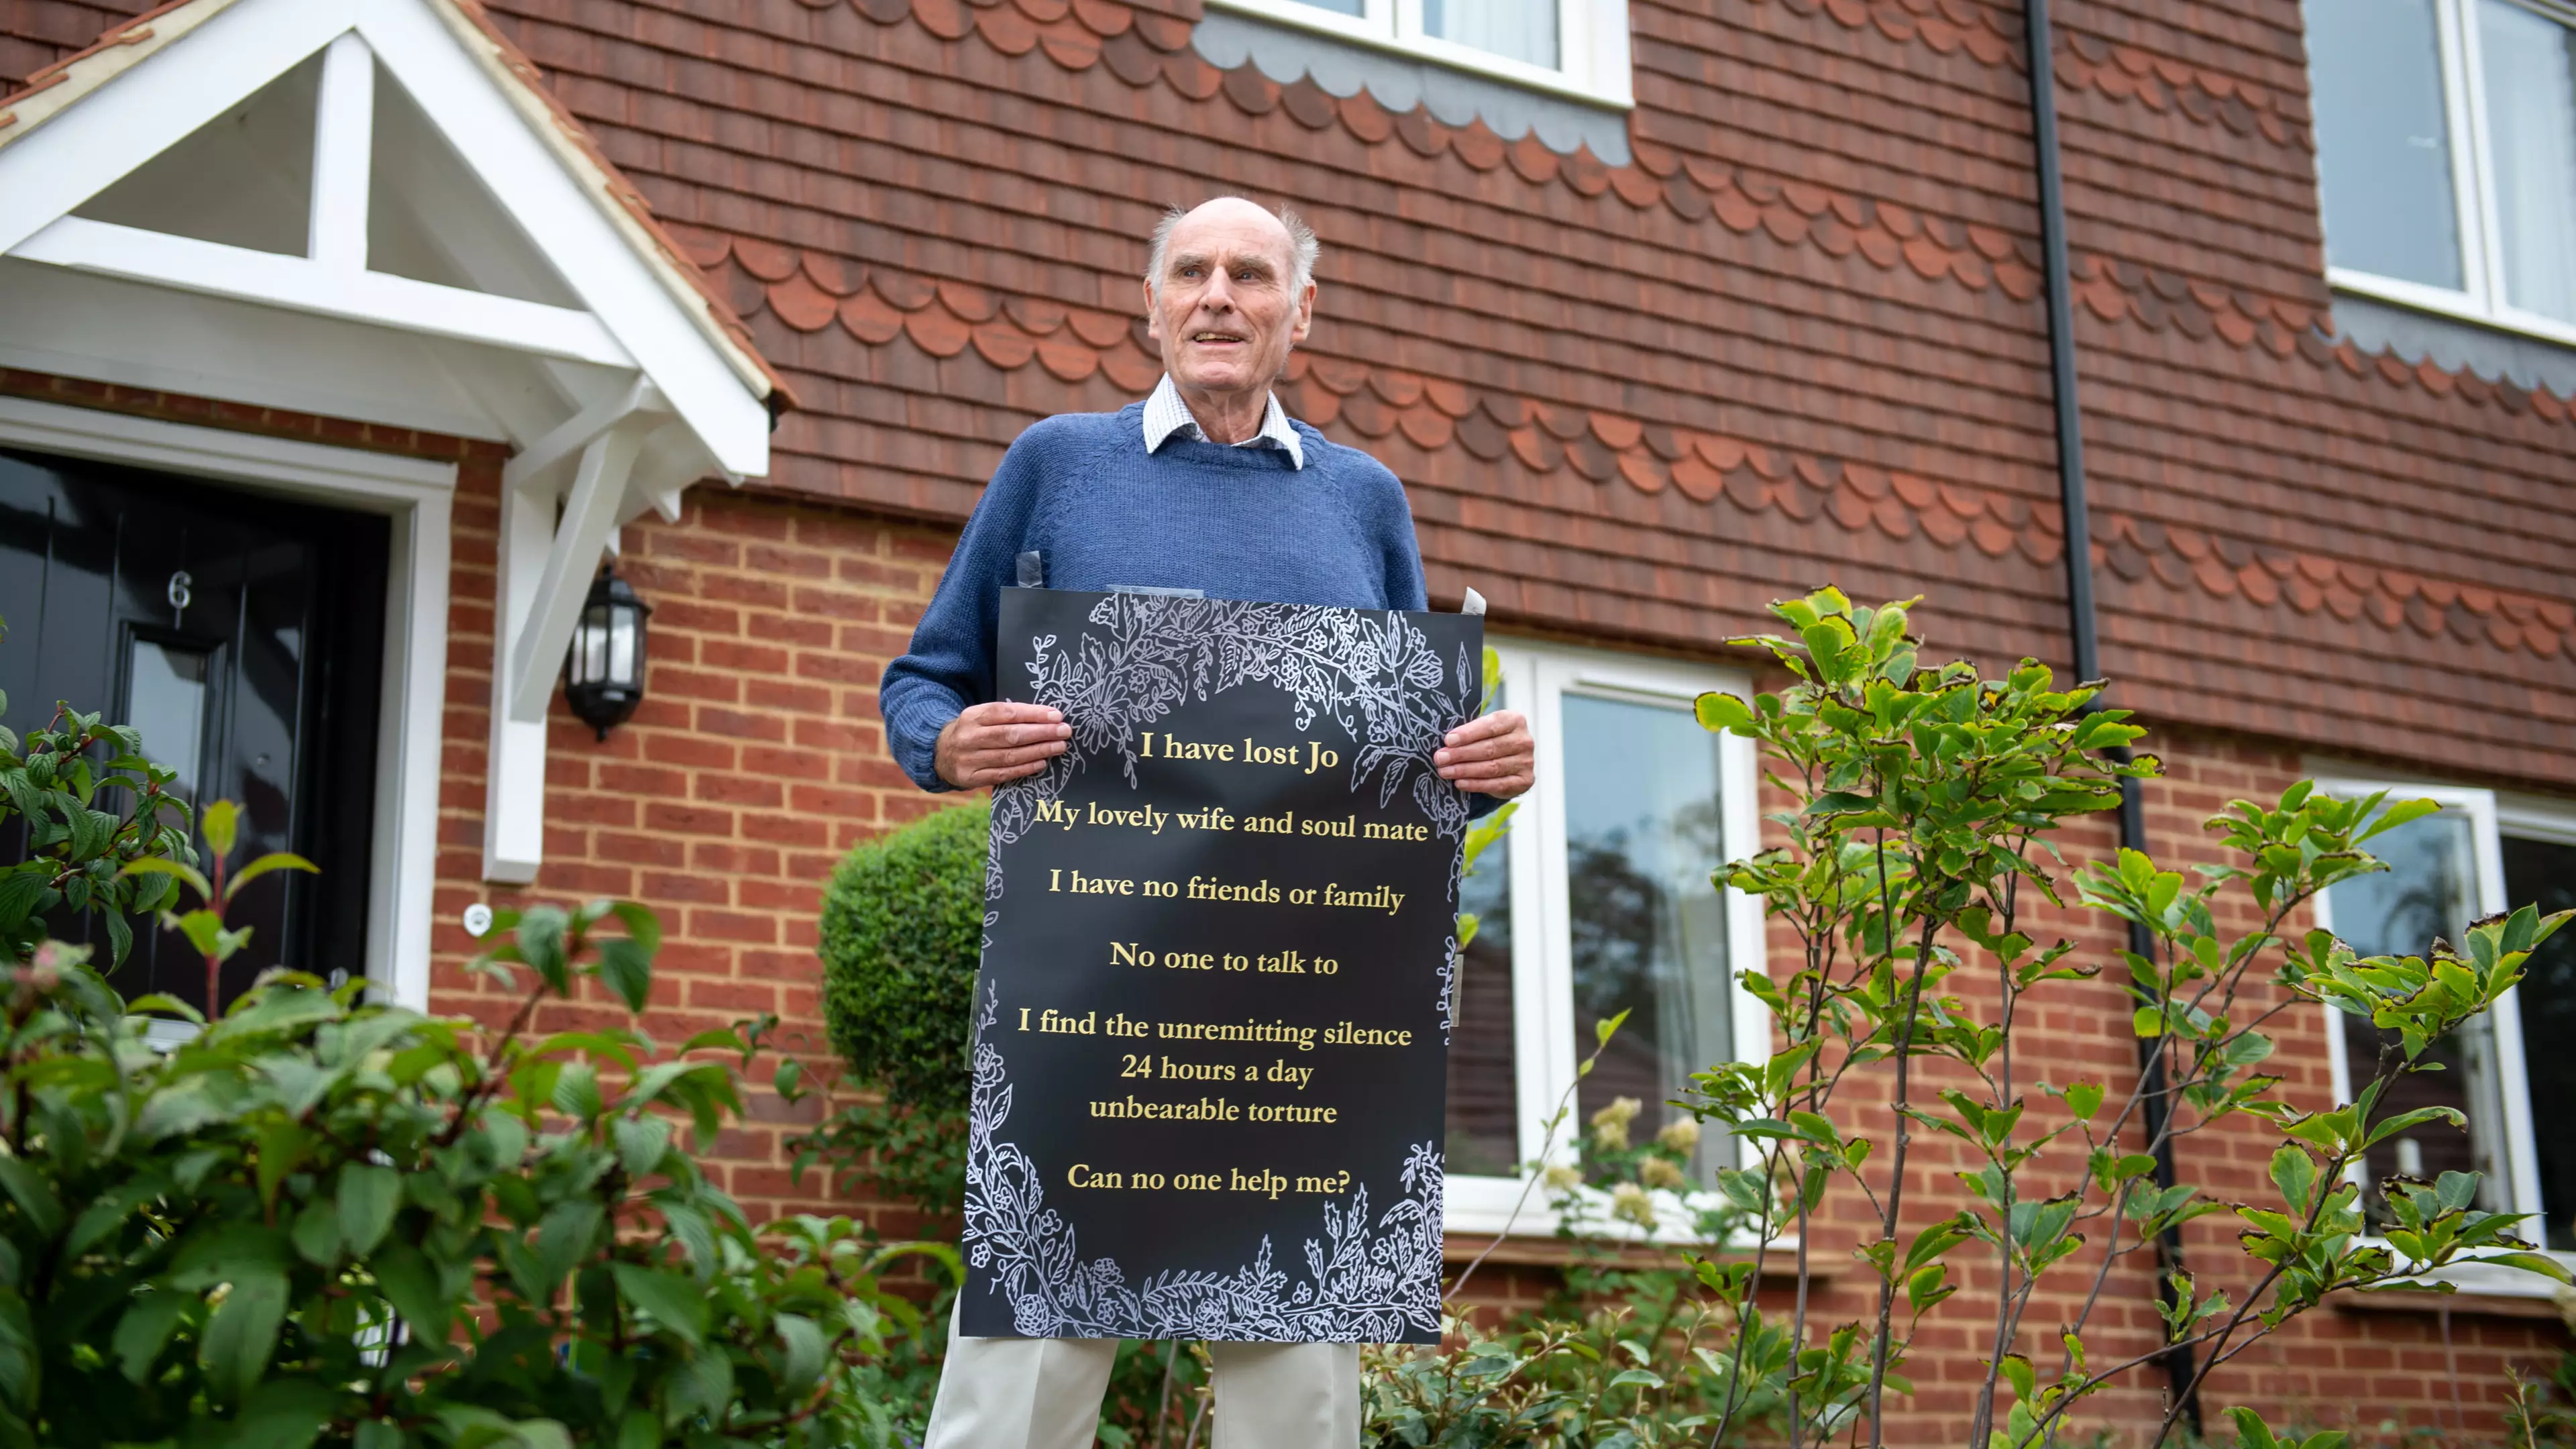 Lonely Pensioner Puts Up Poster Appealing For Friends Following His Wife's Death